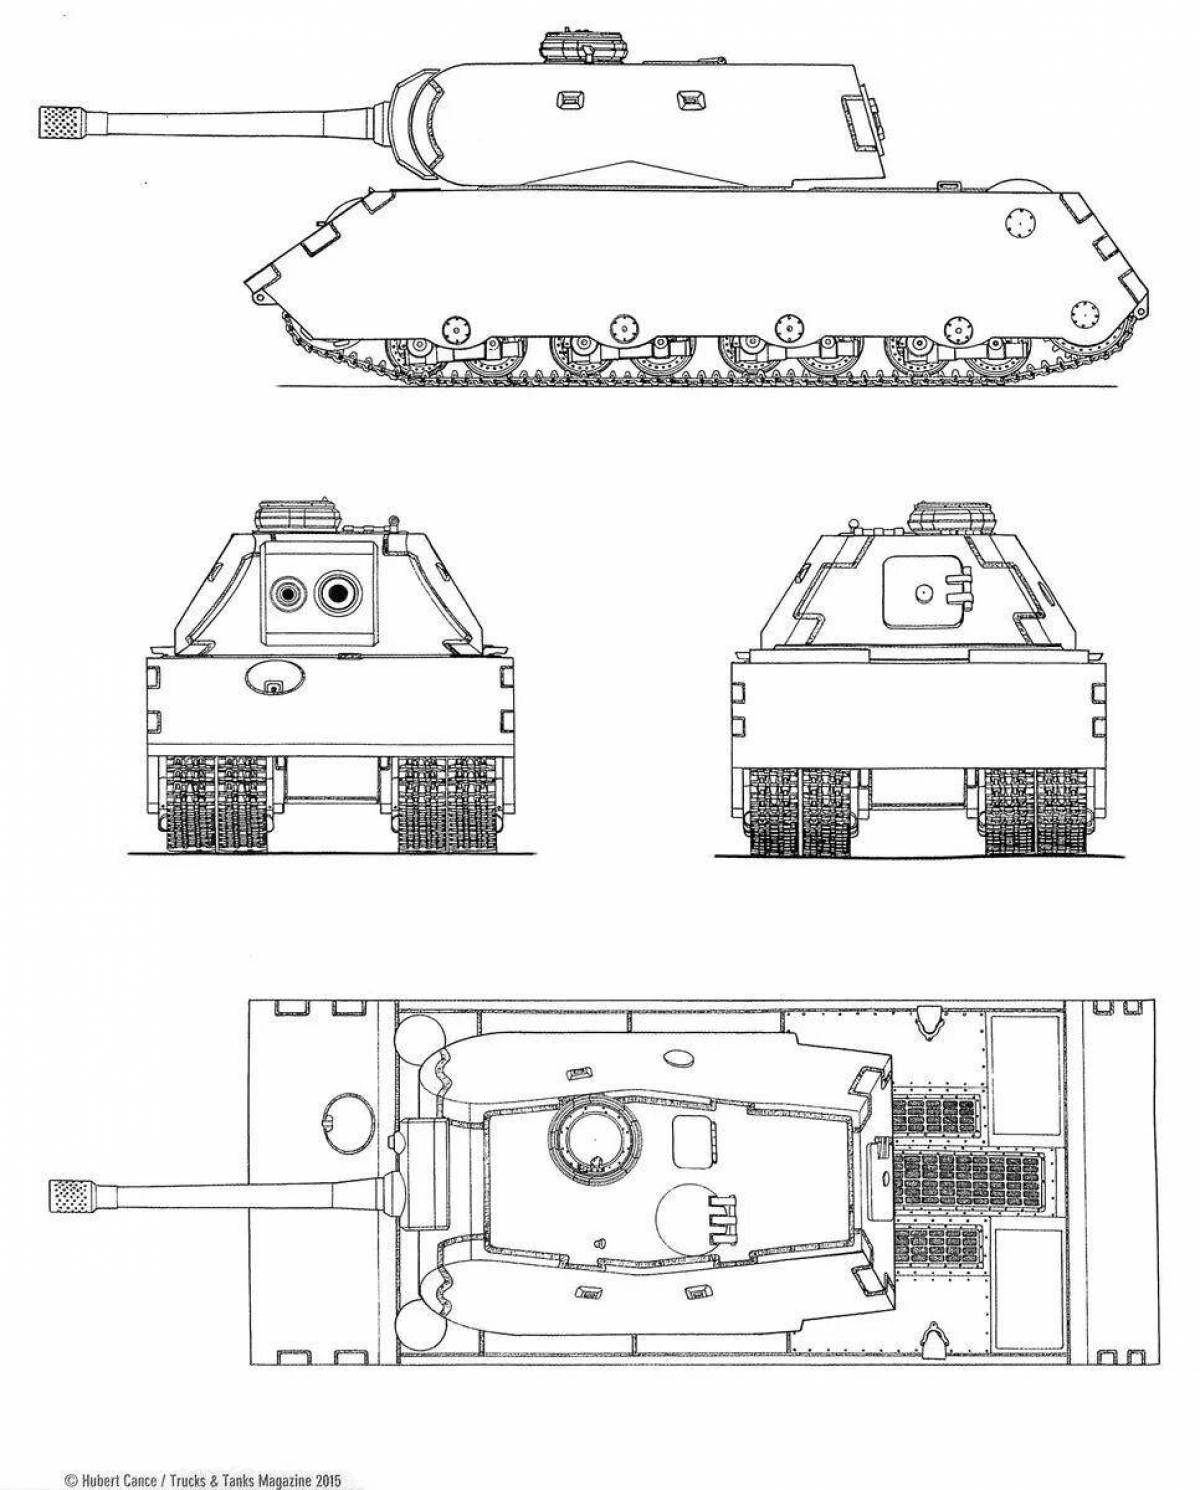 Exciting coloring of the e100 tank